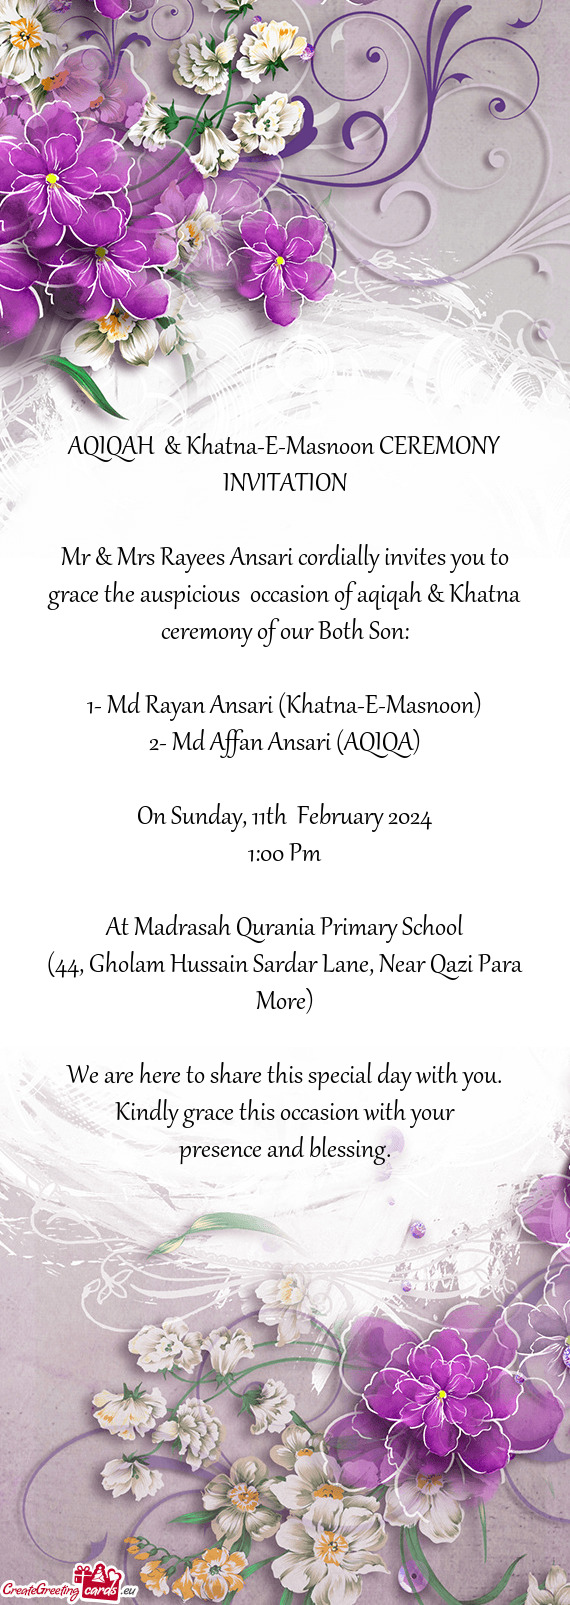 Mr & Mrs Rayees Ansari cordially invites you to grace the auspicious occasion of aqiqah & Khatna ce